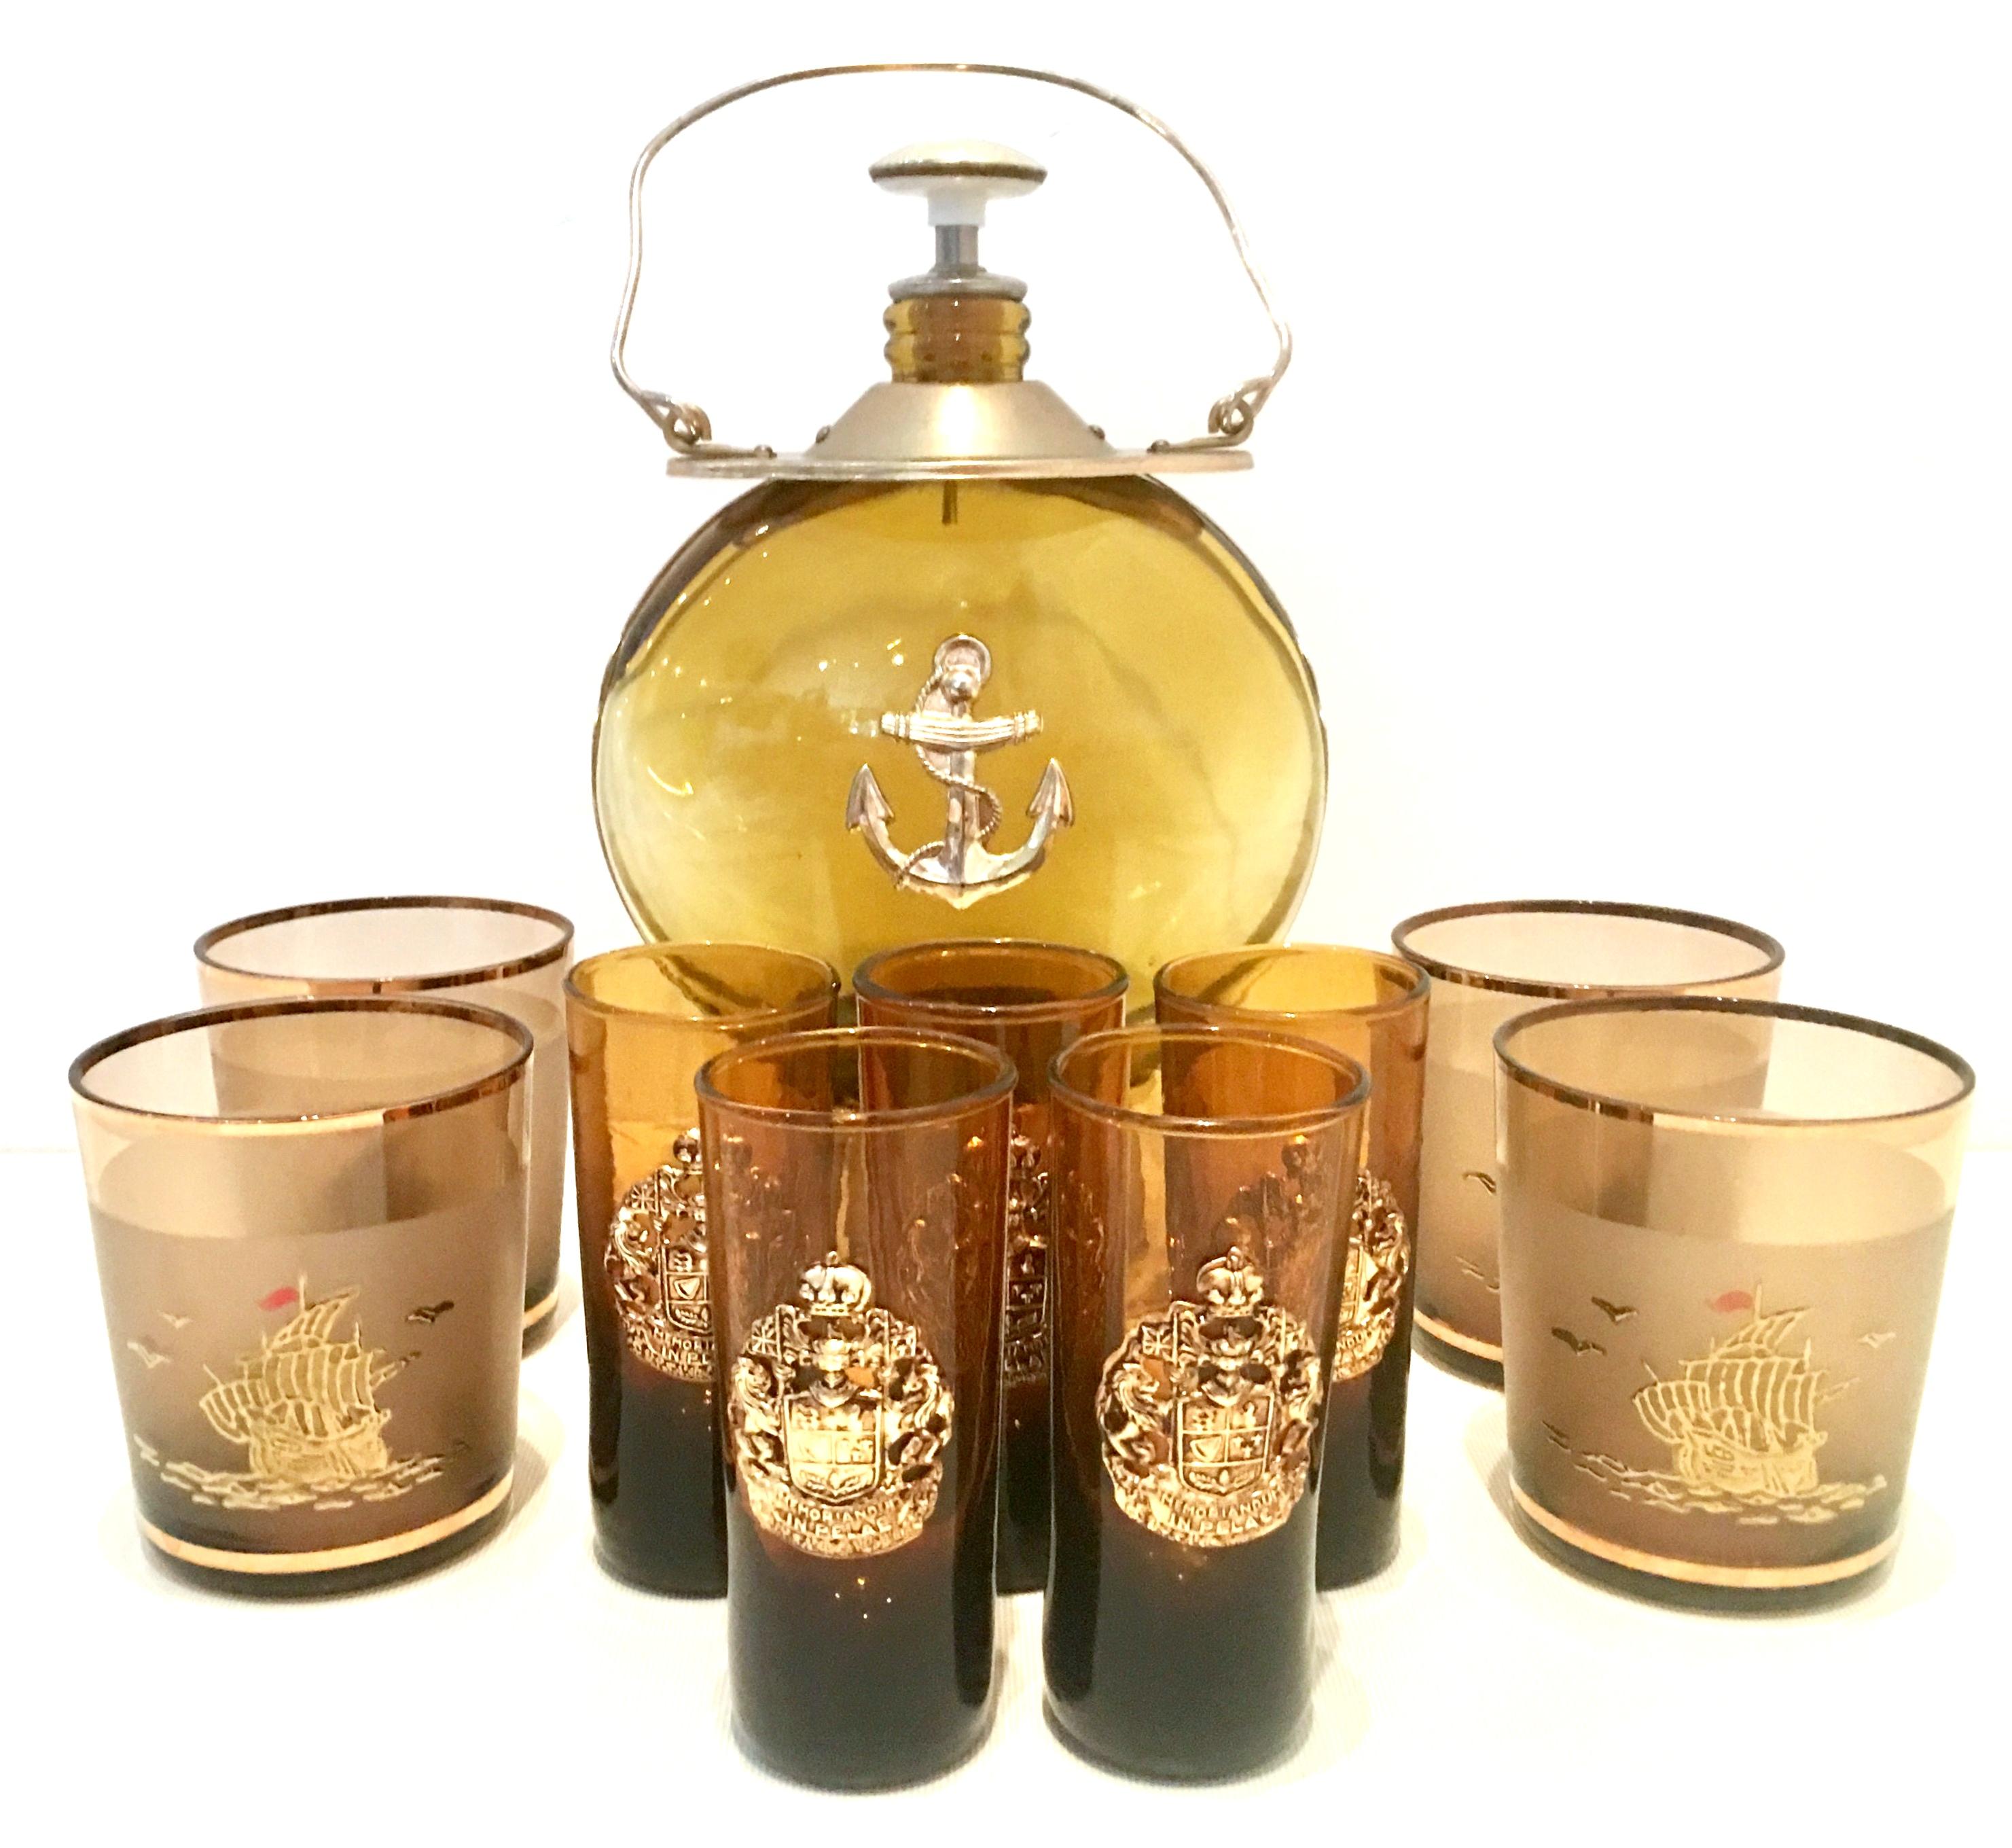 Mid-20th Century amber blown glass, gilt brass and 22-karat gold ten piece drinks set. Set includes, one optic amber and gilt brass hanging lantern style musical liquor decanter., five cordial glasses with applied gilt coat of arms detail and four